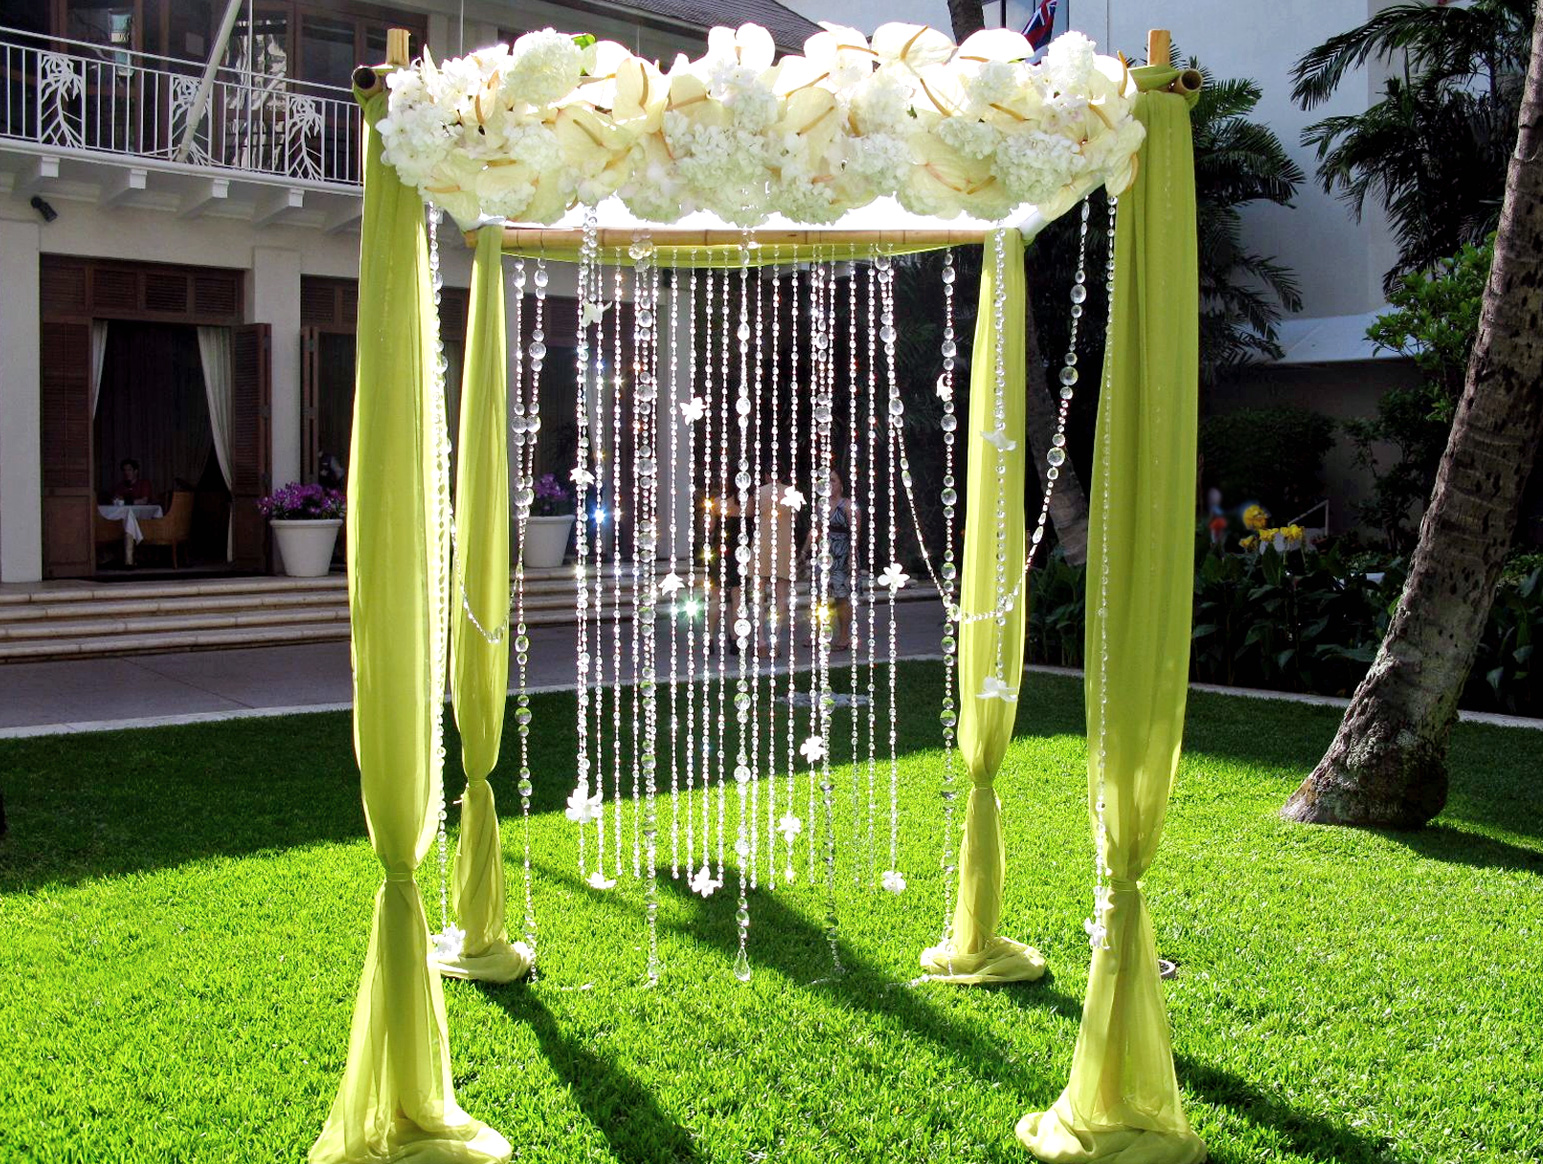 Where To Buy Wedding Decorations Cheap